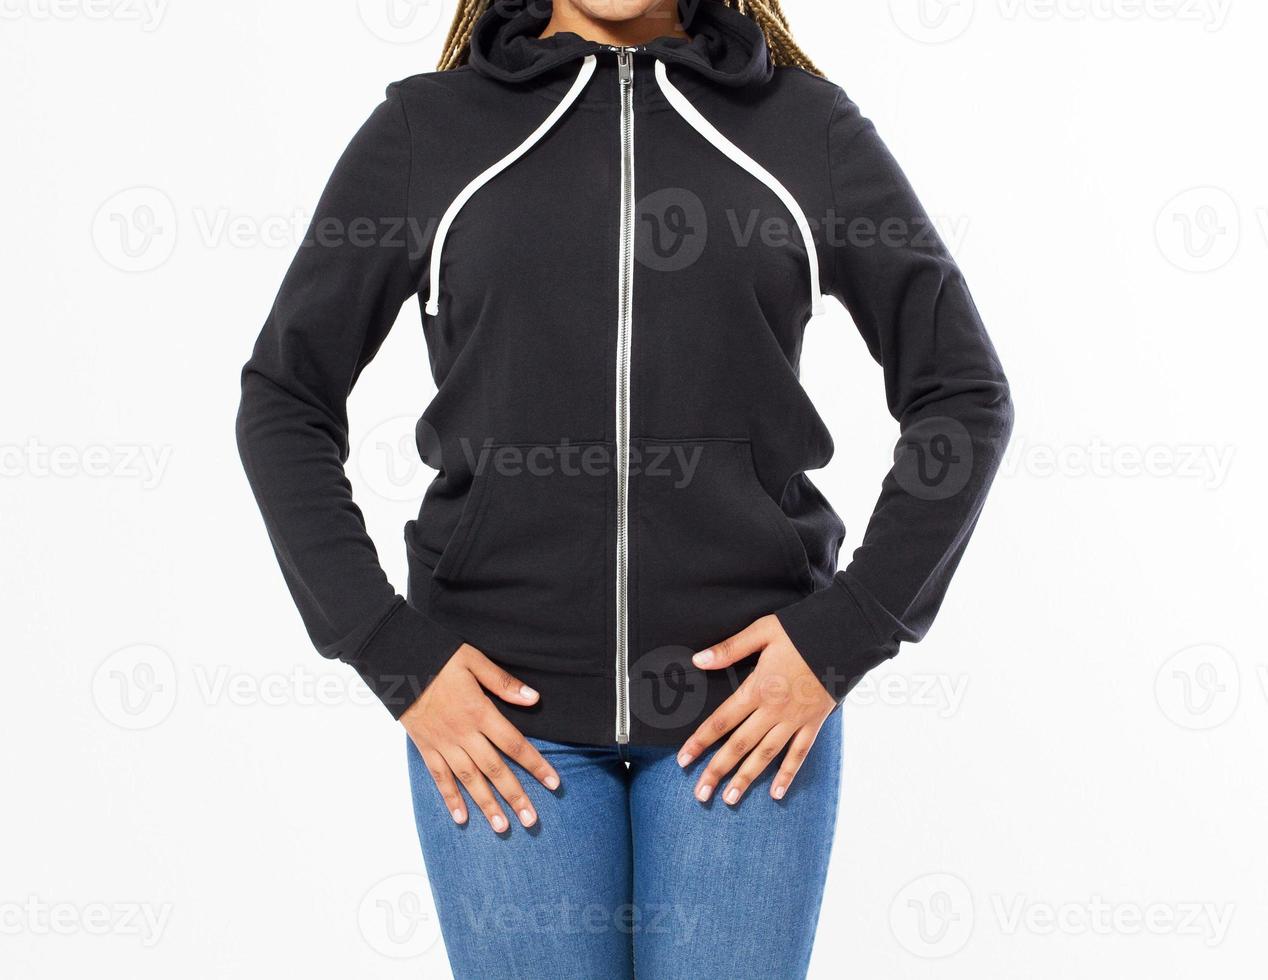 Front black sweatshirt view. Afro woman show on template clothes for print and copy space isolated on white background. Mockup cropped image photo